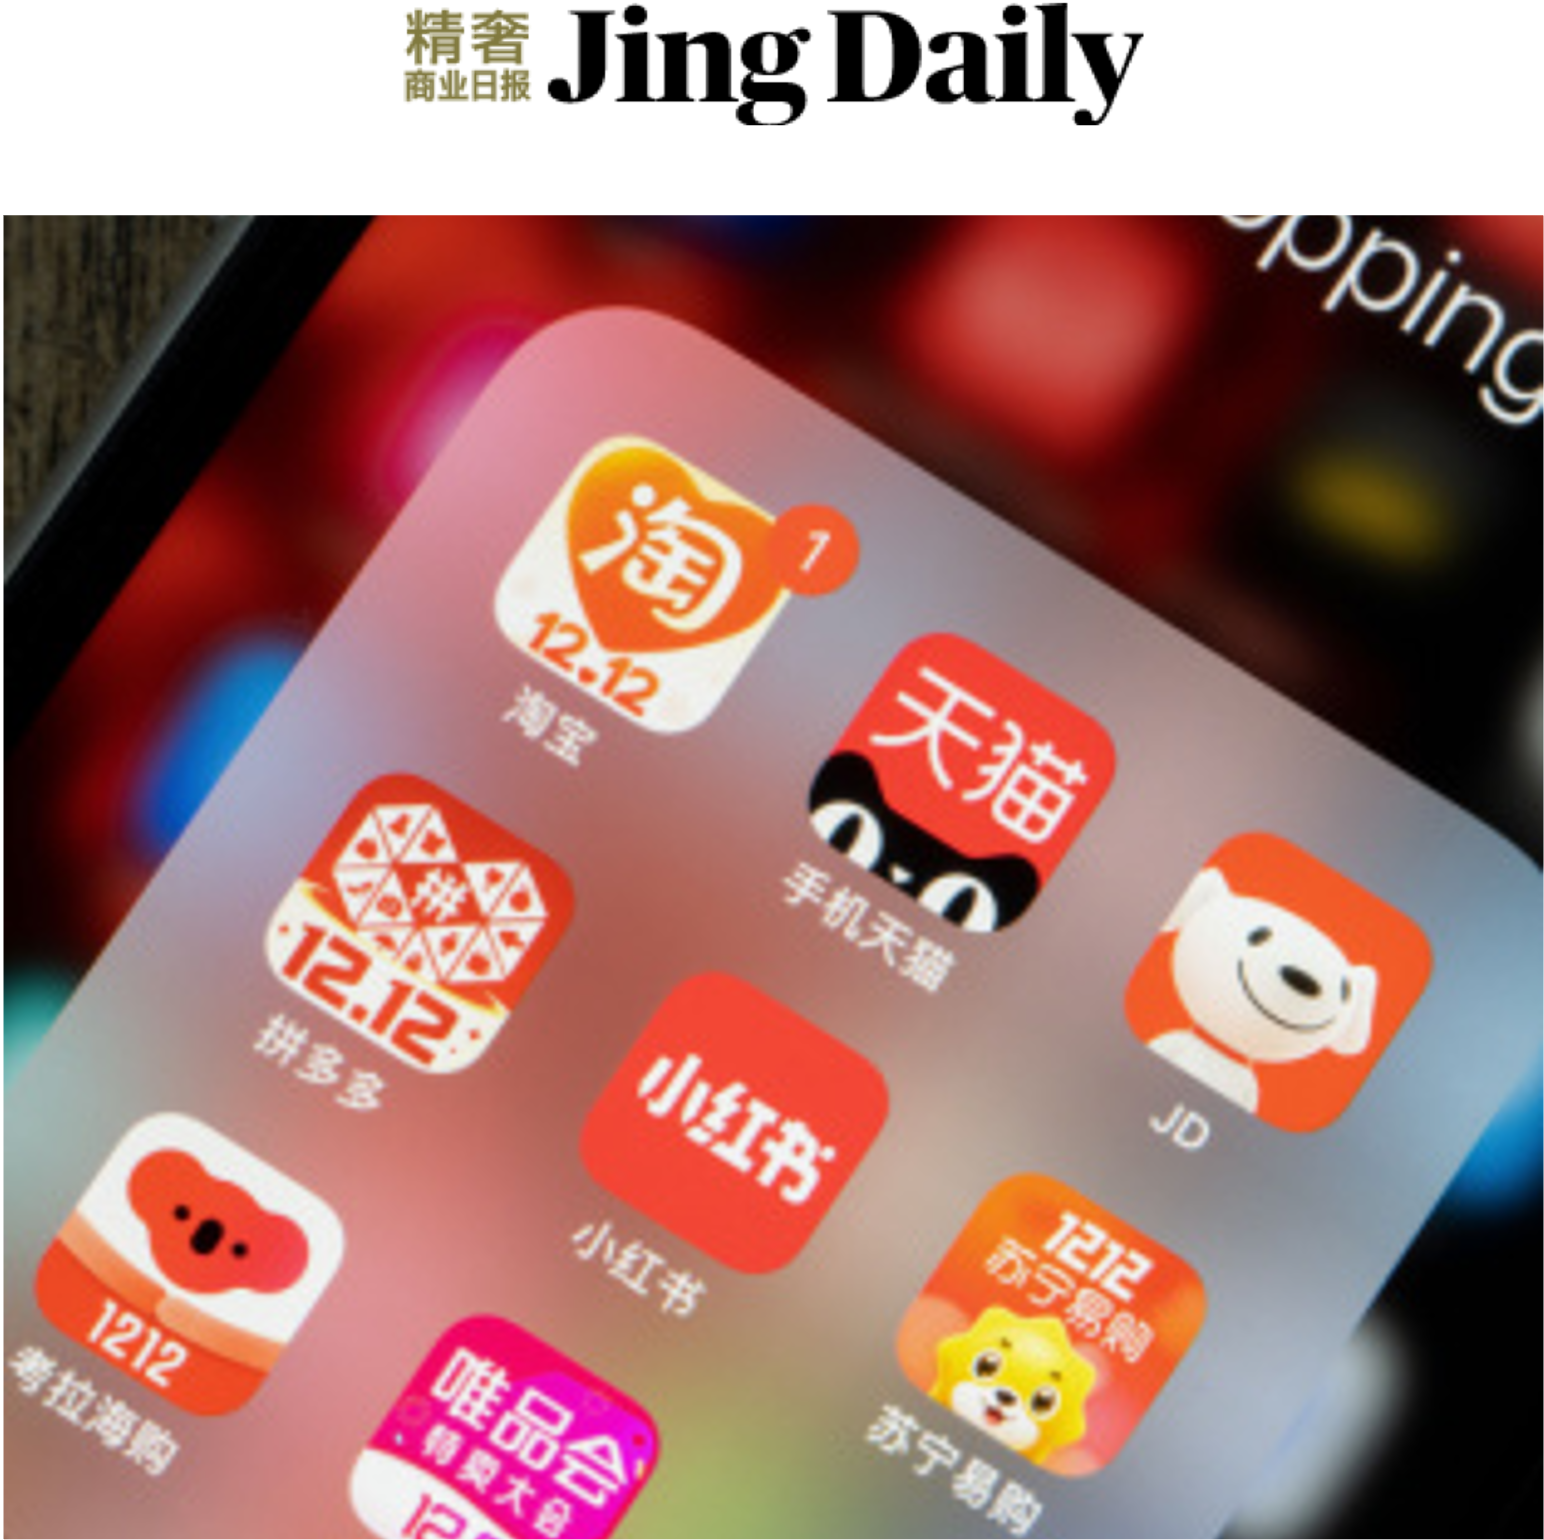 What China’s Cross-Platform Livestreaming Freedom Means For Luxury